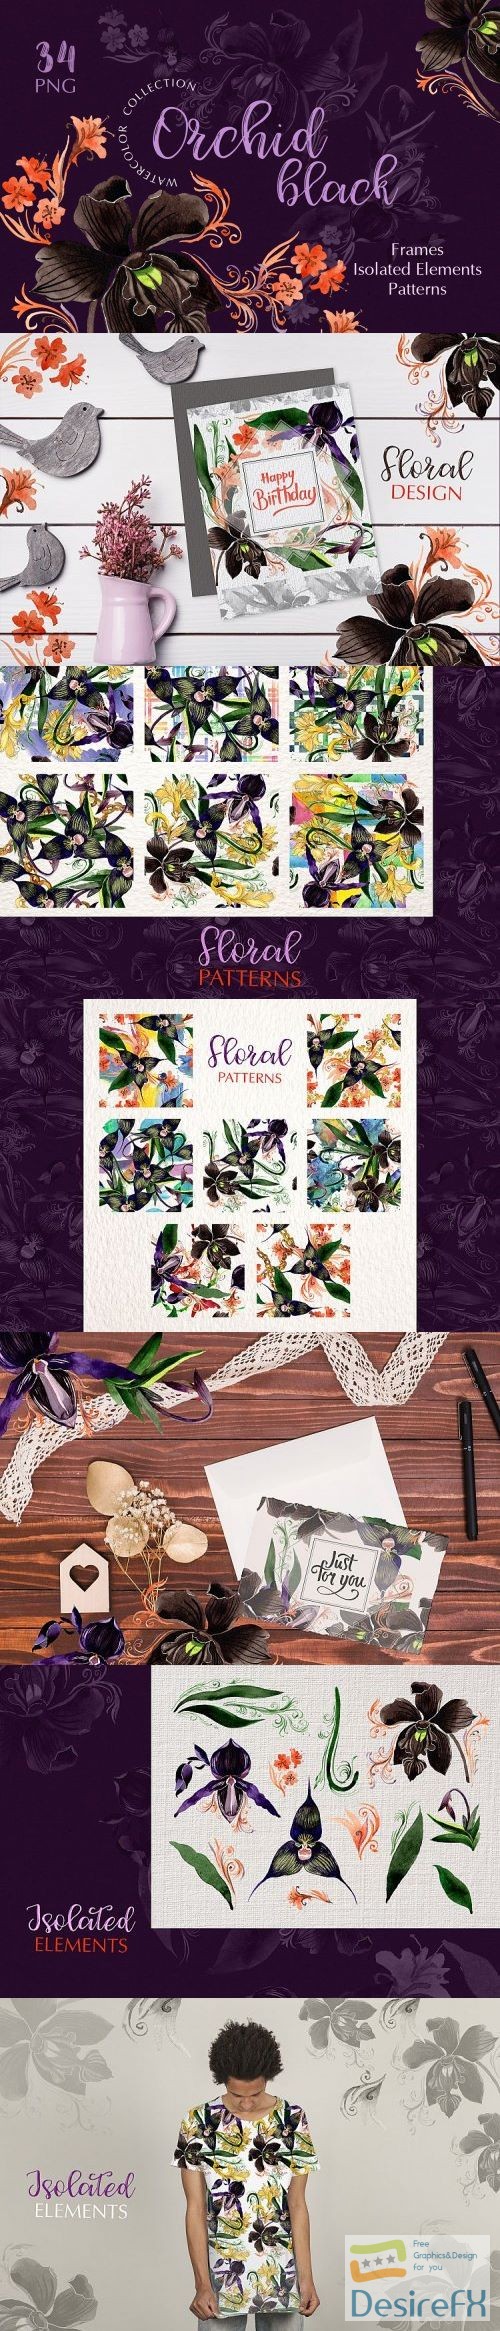 Orchid Black Watercolor Png 248424